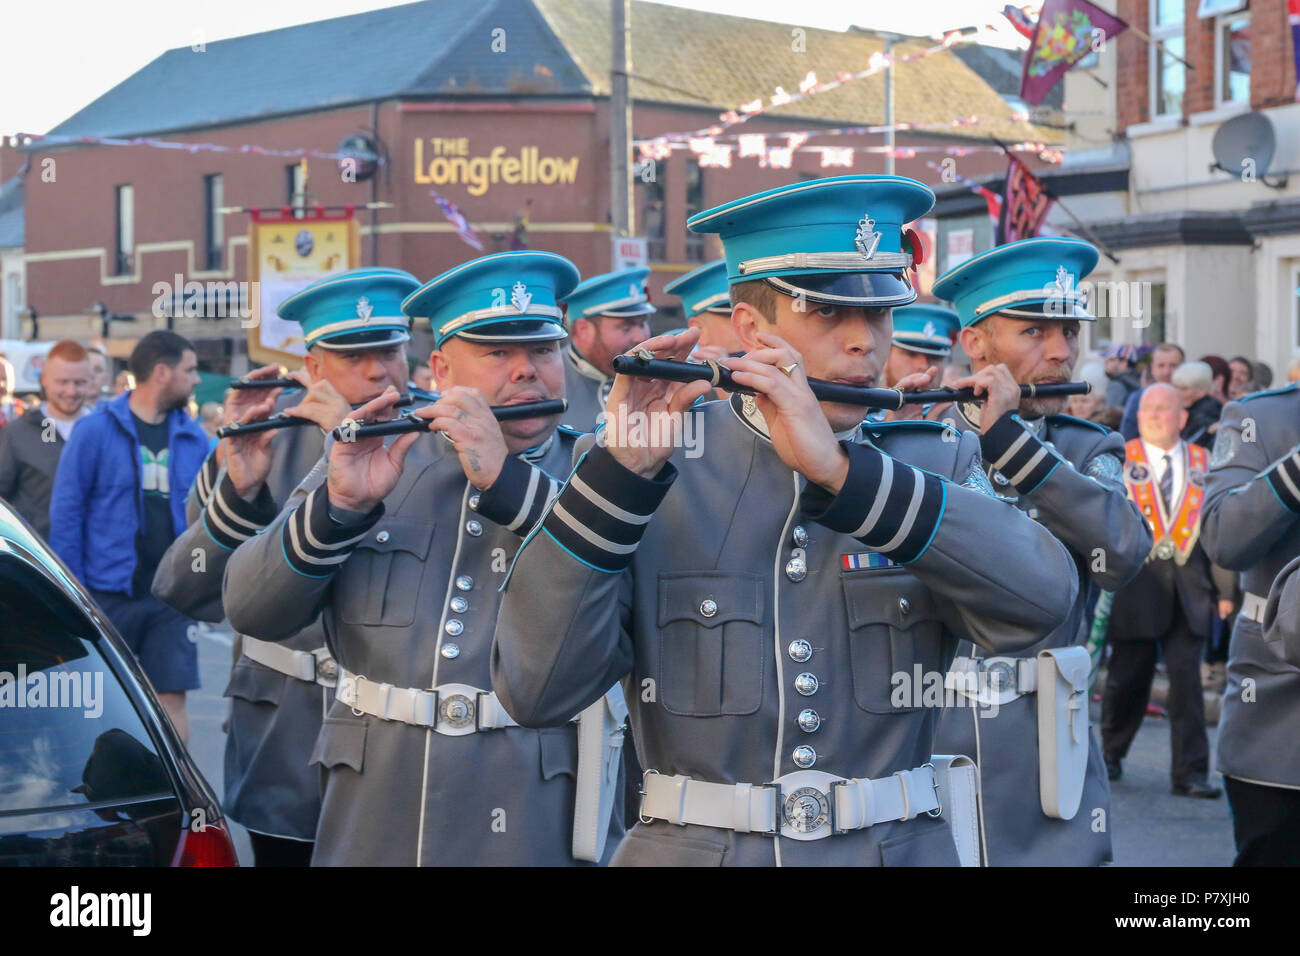 01 July 2016 – Orange Order Parade in Belfast marking the anniversary of the battle of the Somme. This is the Ballymacarrett and No 6 District Parade in east Belfast. Each year throughout Northern Ireland the Orange Order hold a number of parades and church services to mark the anniversary of the Battle of the Somme given its immense impact back then on the province  - lodges and bands parade watched by large crowds each year. Stock Photo